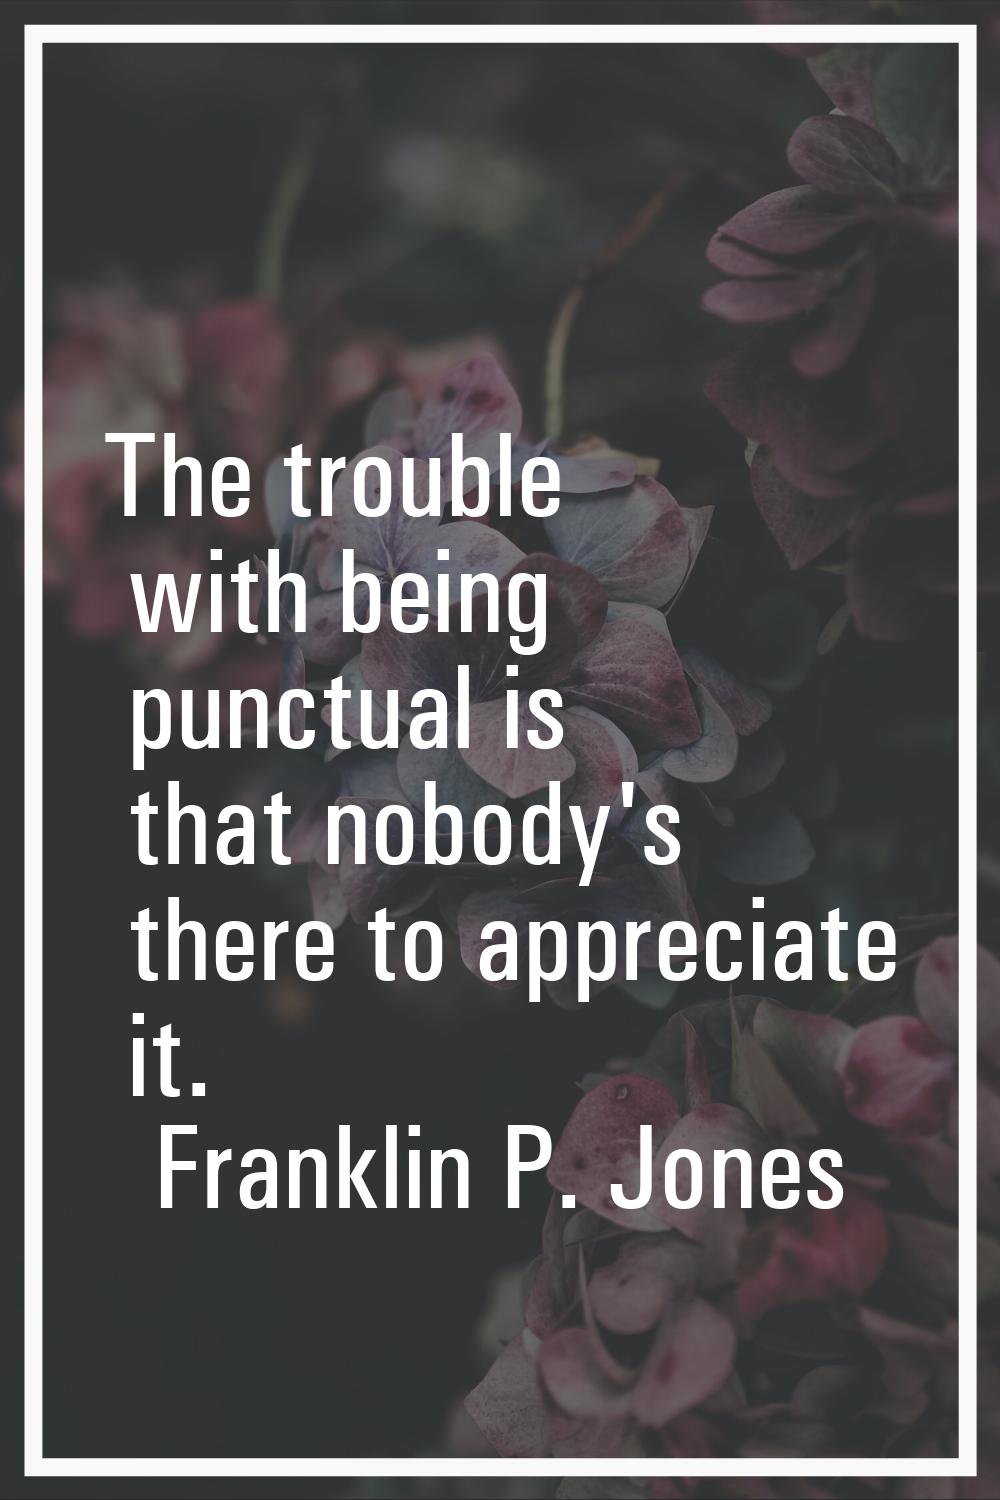 The trouble with being punctual is that nobody's there to appreciate it.